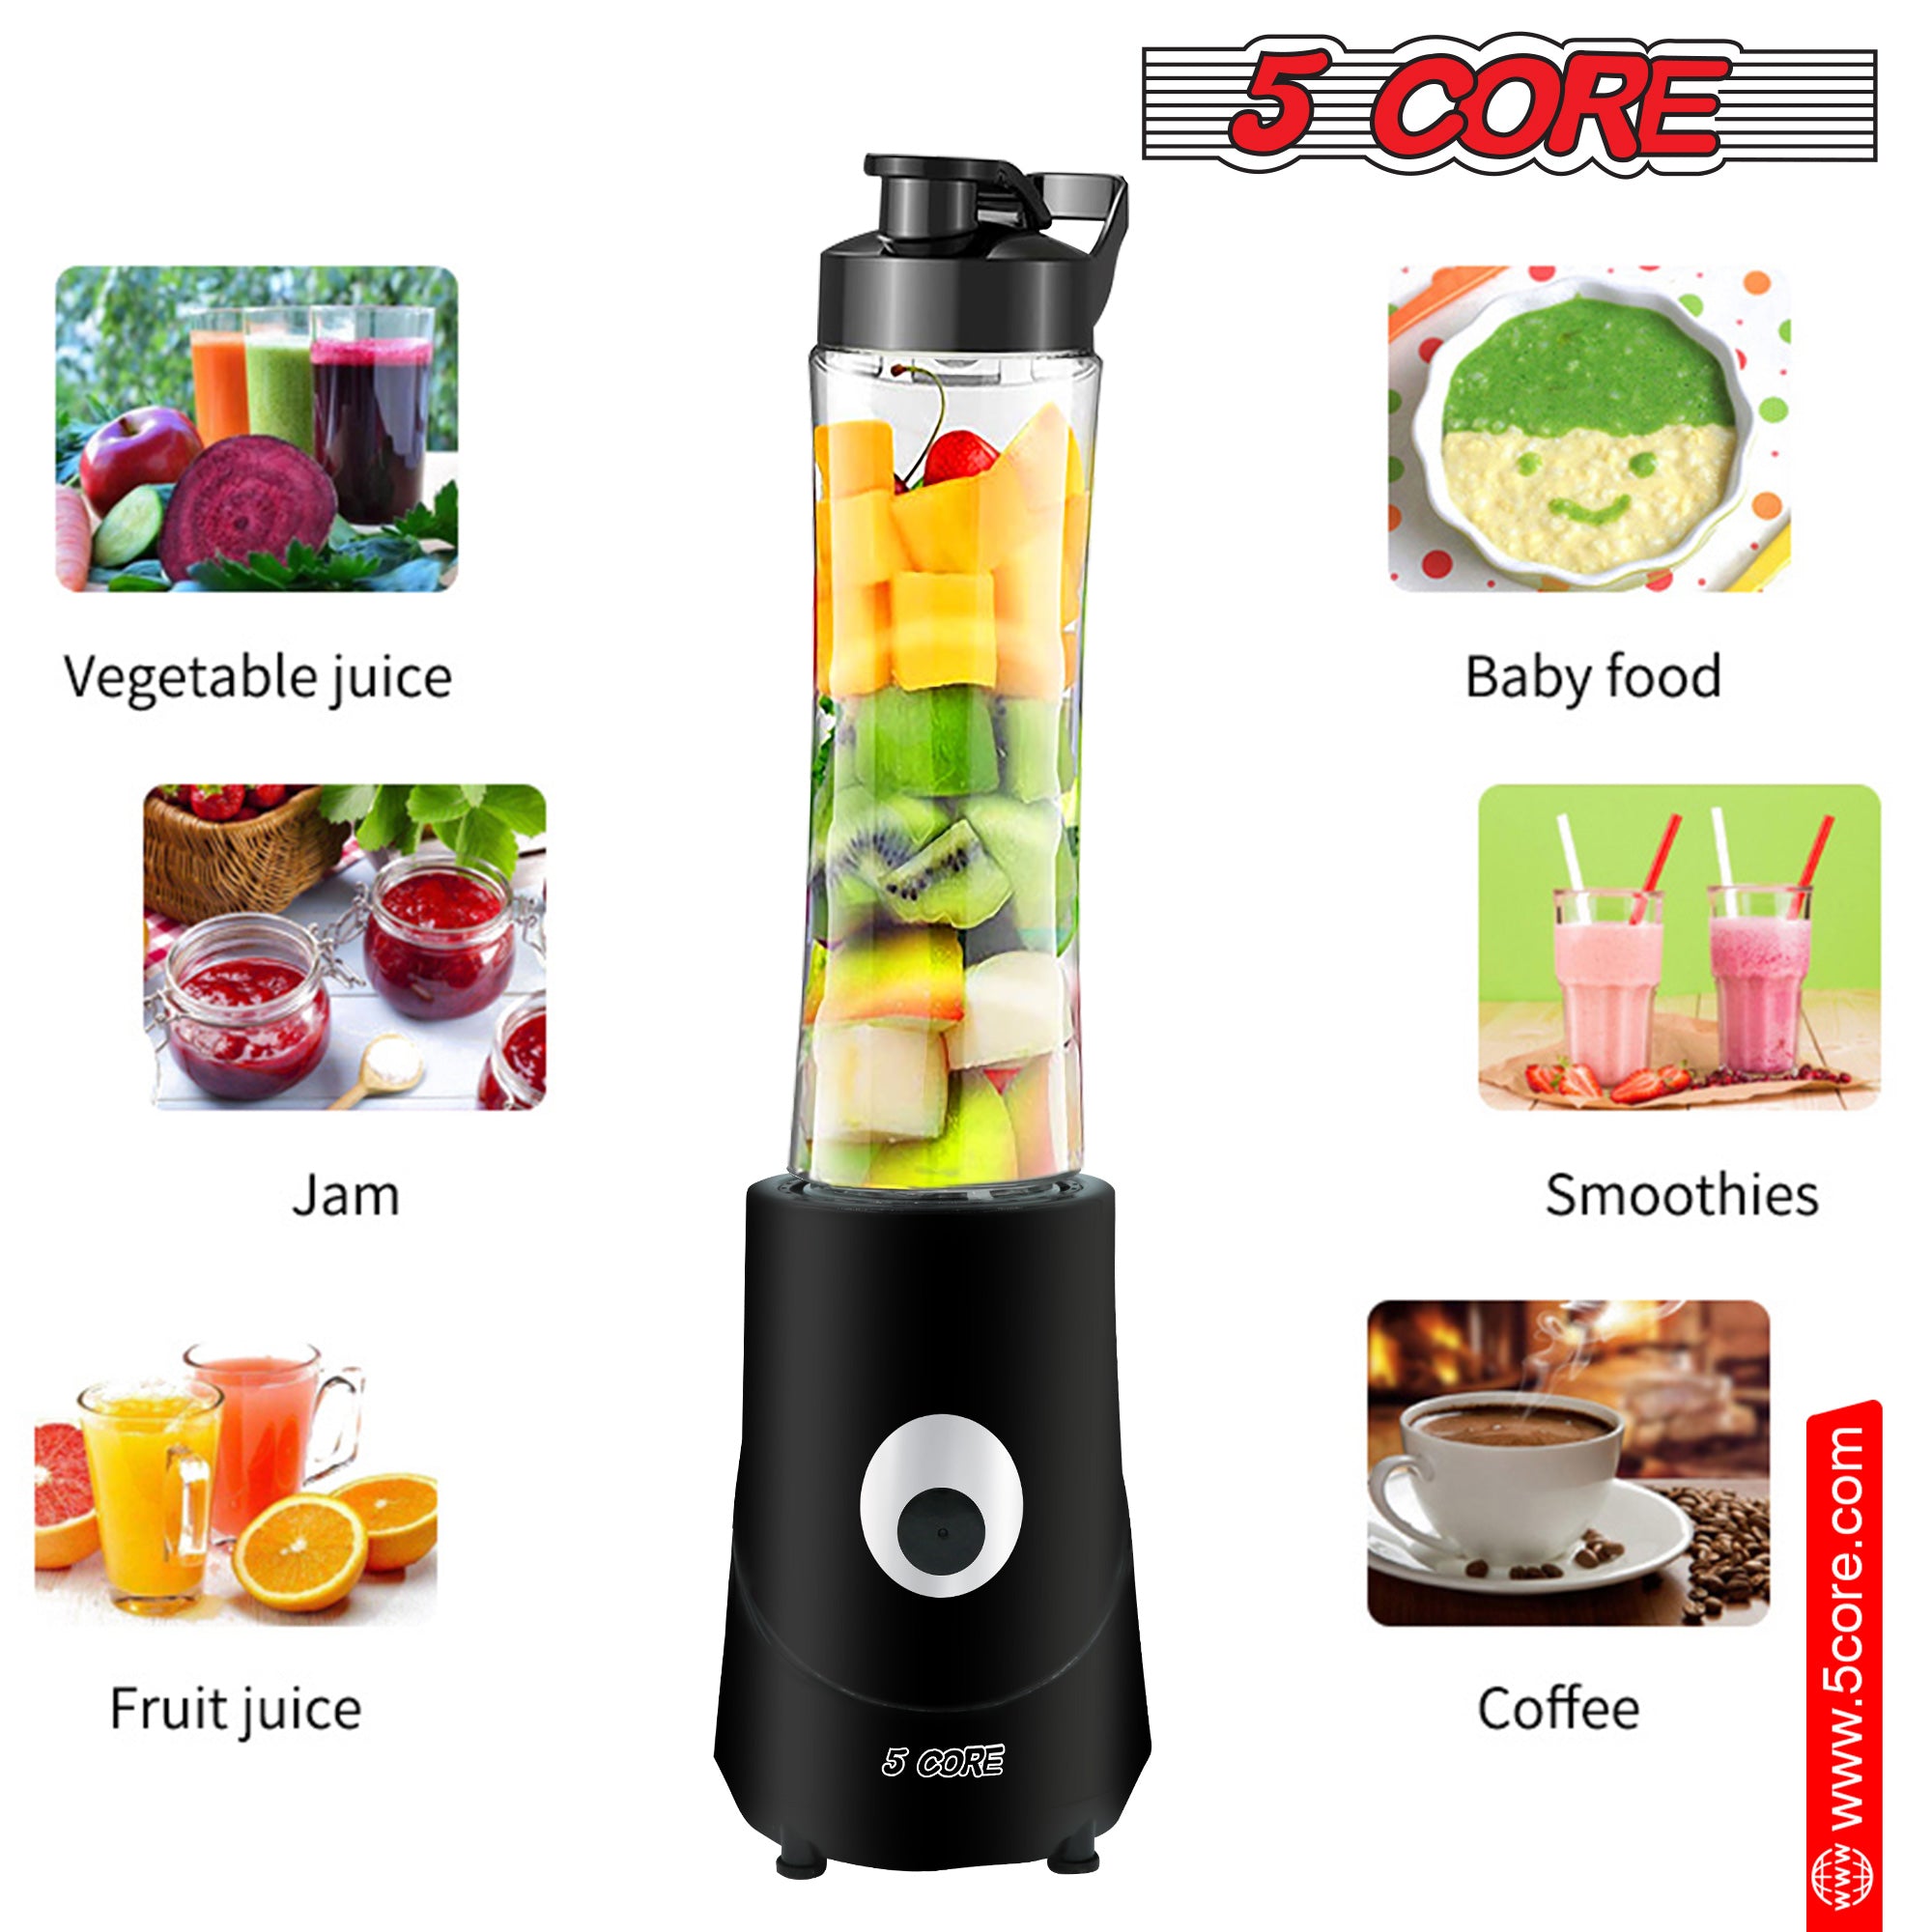 5 Core Smoothie Blender Personal Blender for Shakes and Smoothies 300W Powerful Food Processor with 20oz Portable Sports Bottle